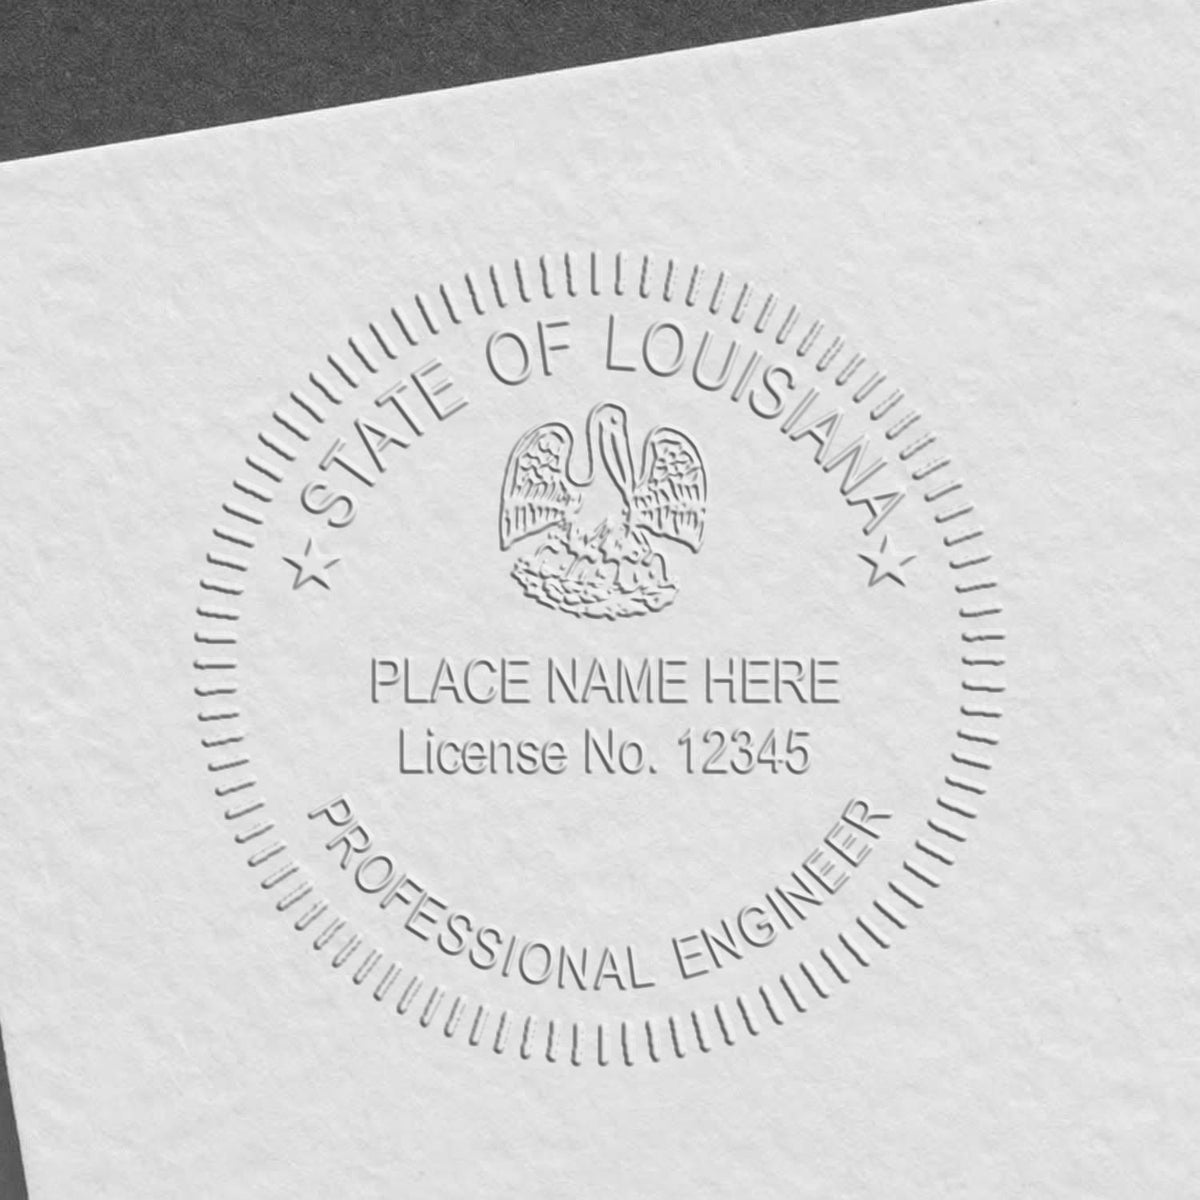 A stamped impression of the Soft Louisiana Professional Engineer Seal in this stylish lifestyle photo, setting the tone for a unique and personalized product.